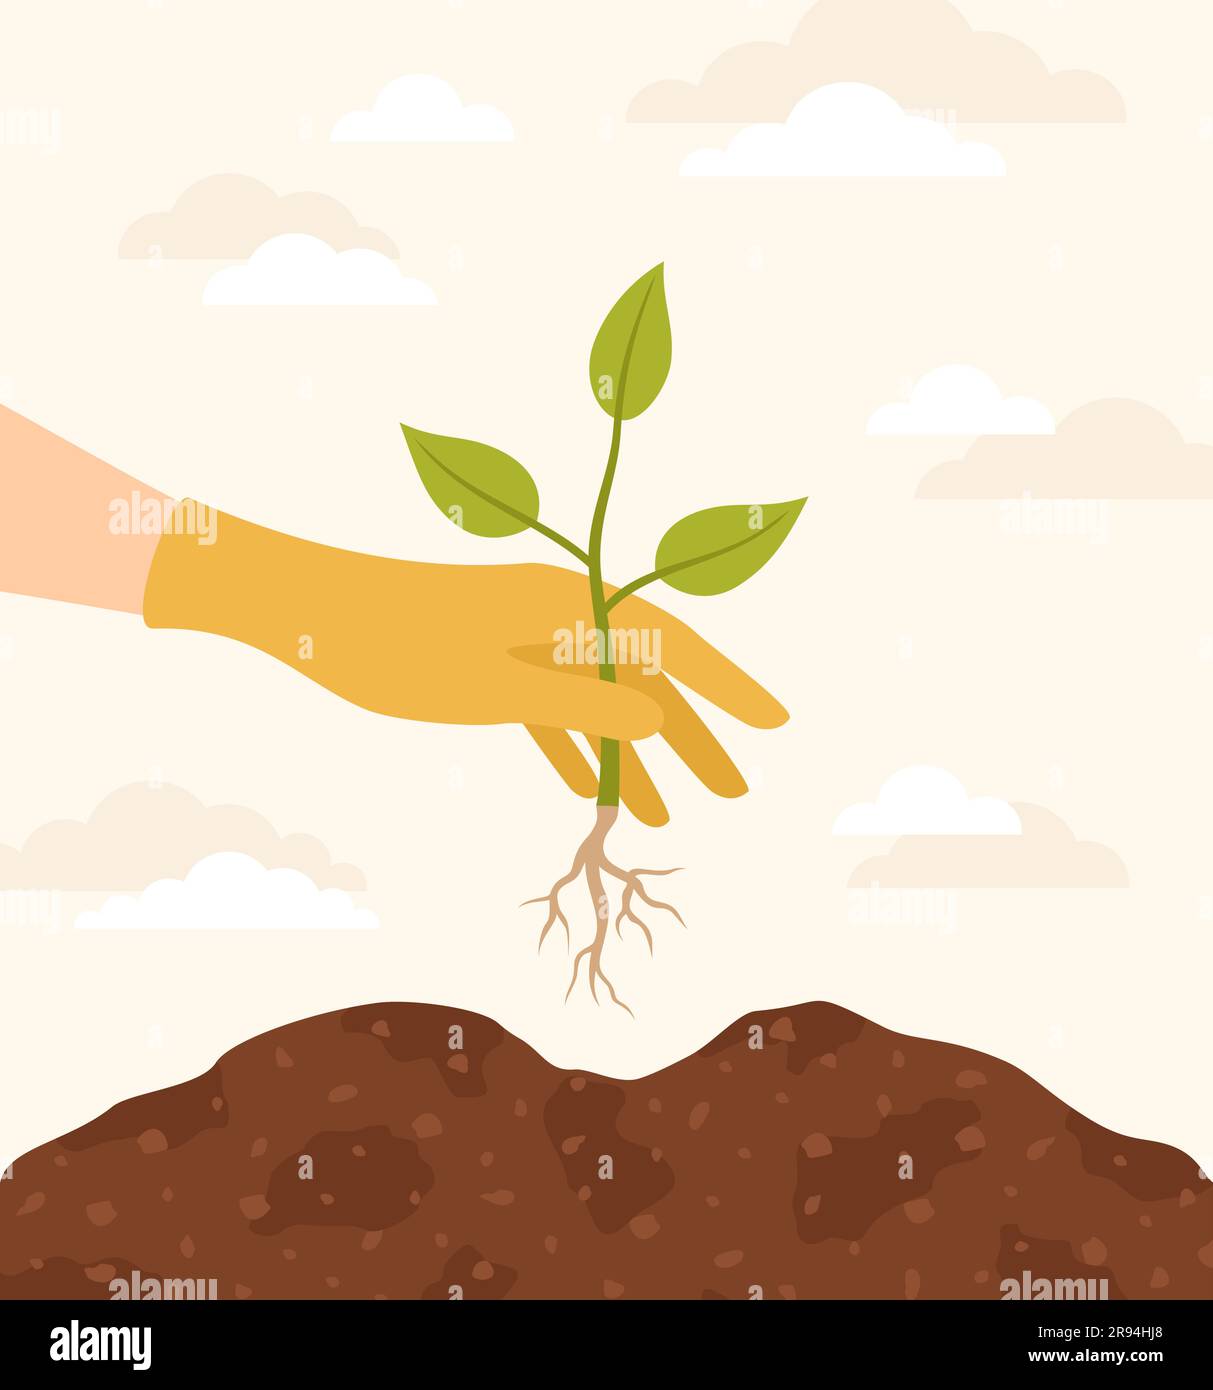 A hand in a yellow glove planting a seedling in the ground. Vector illustration in flat style Stock Vector